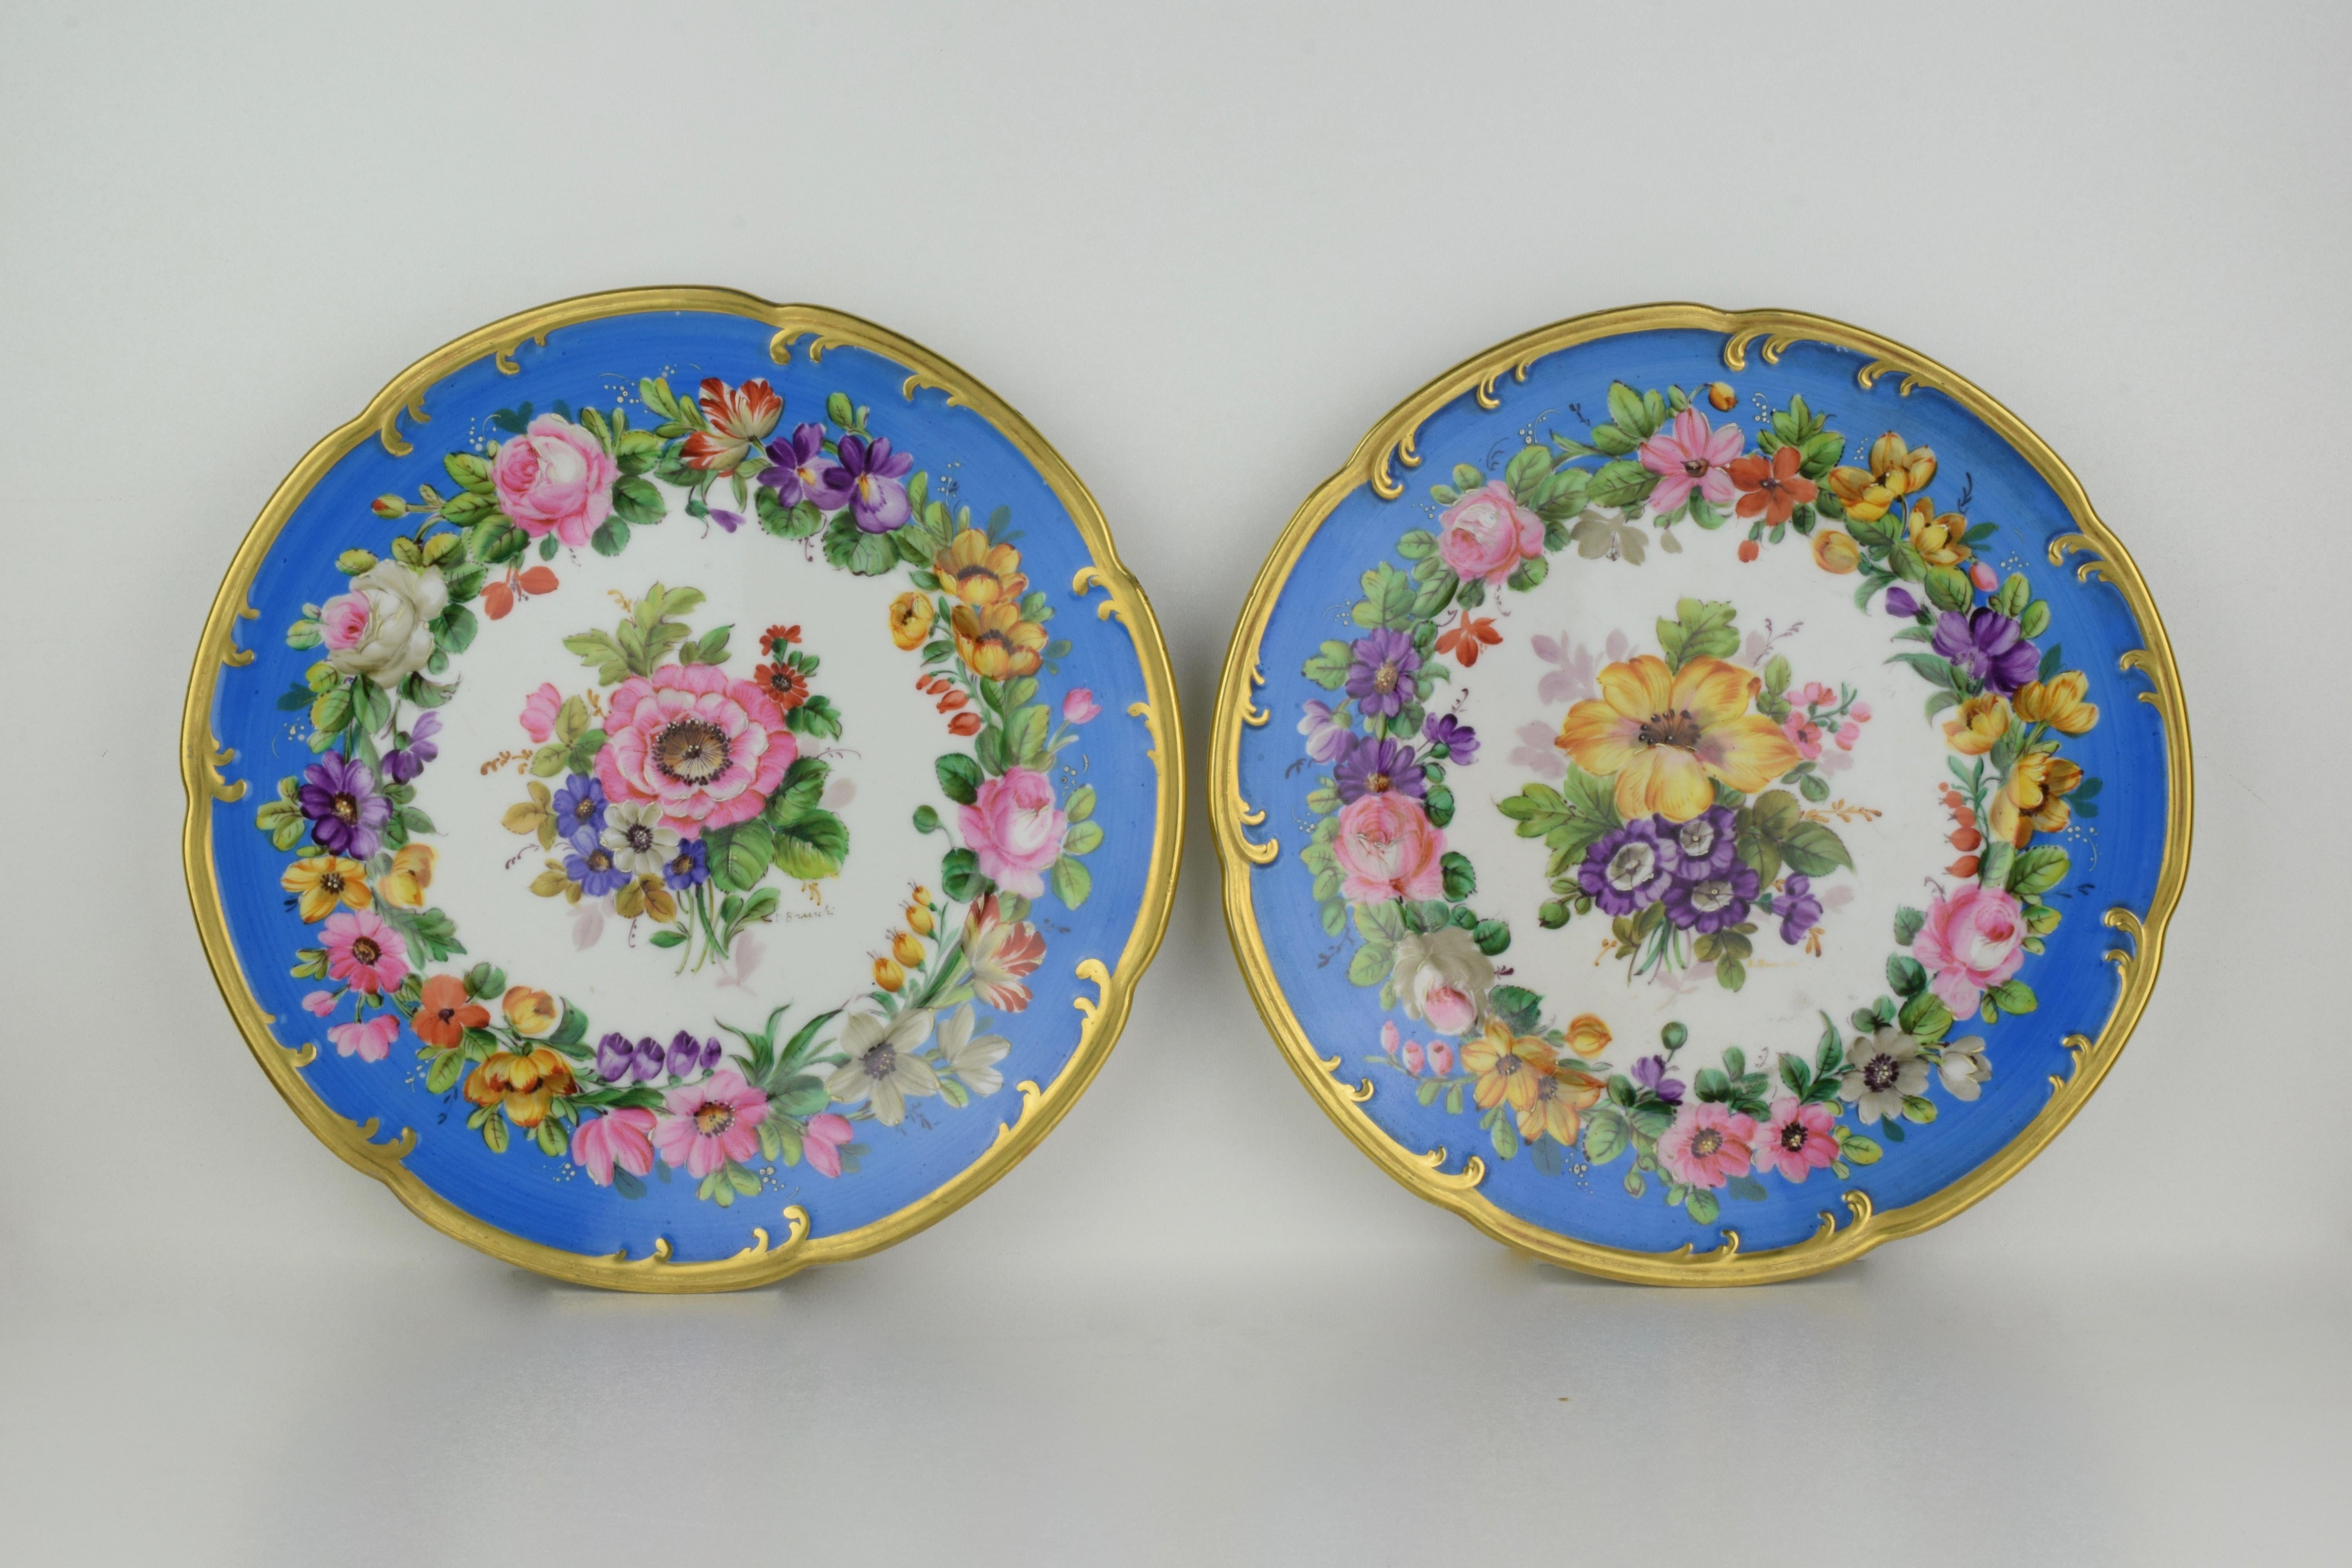 Magnificent decoration of hand painted and decorated flowers. Pure gold border
Signed by D. Bruschi

Having seen the signature and the quality of the execution, they can be prudently attributed to Domenico Bruschi (Perugia 1840 - Rome 1910)